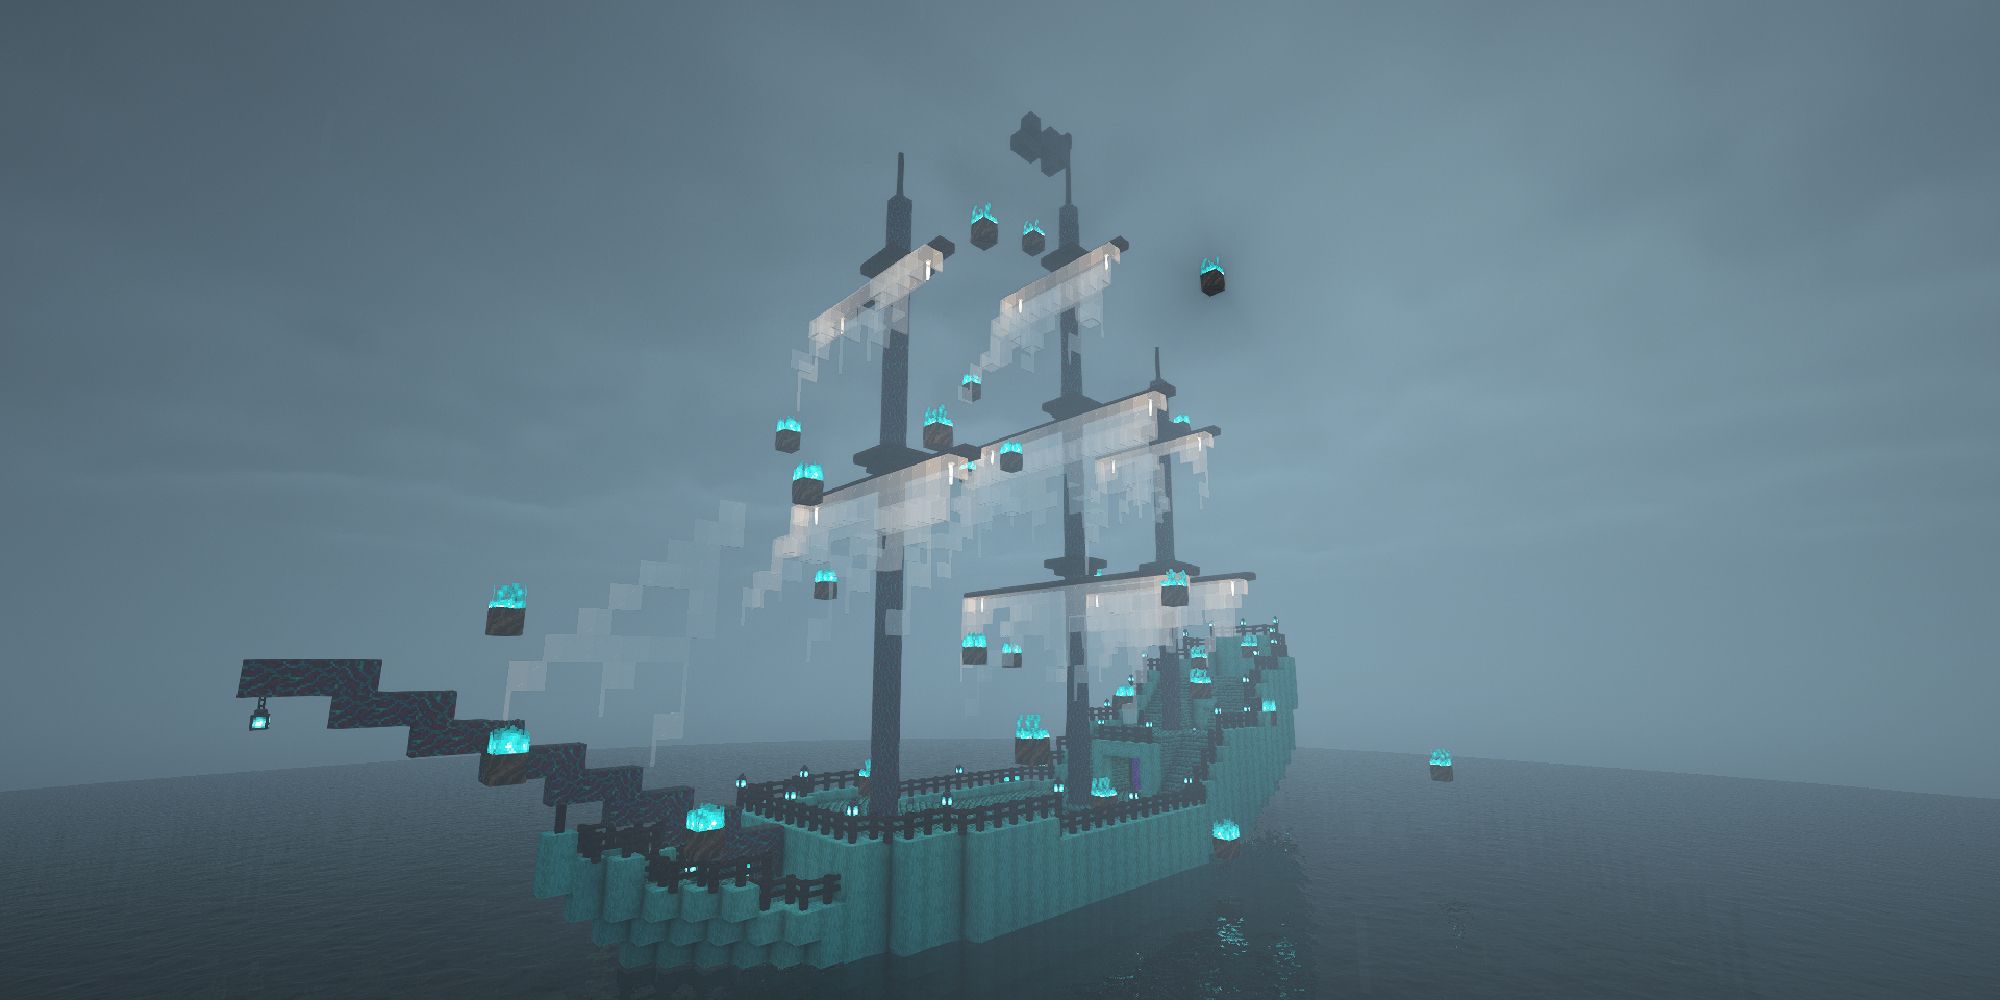 minecraft haunted pirate ship with warped wood sides in a misty ocean